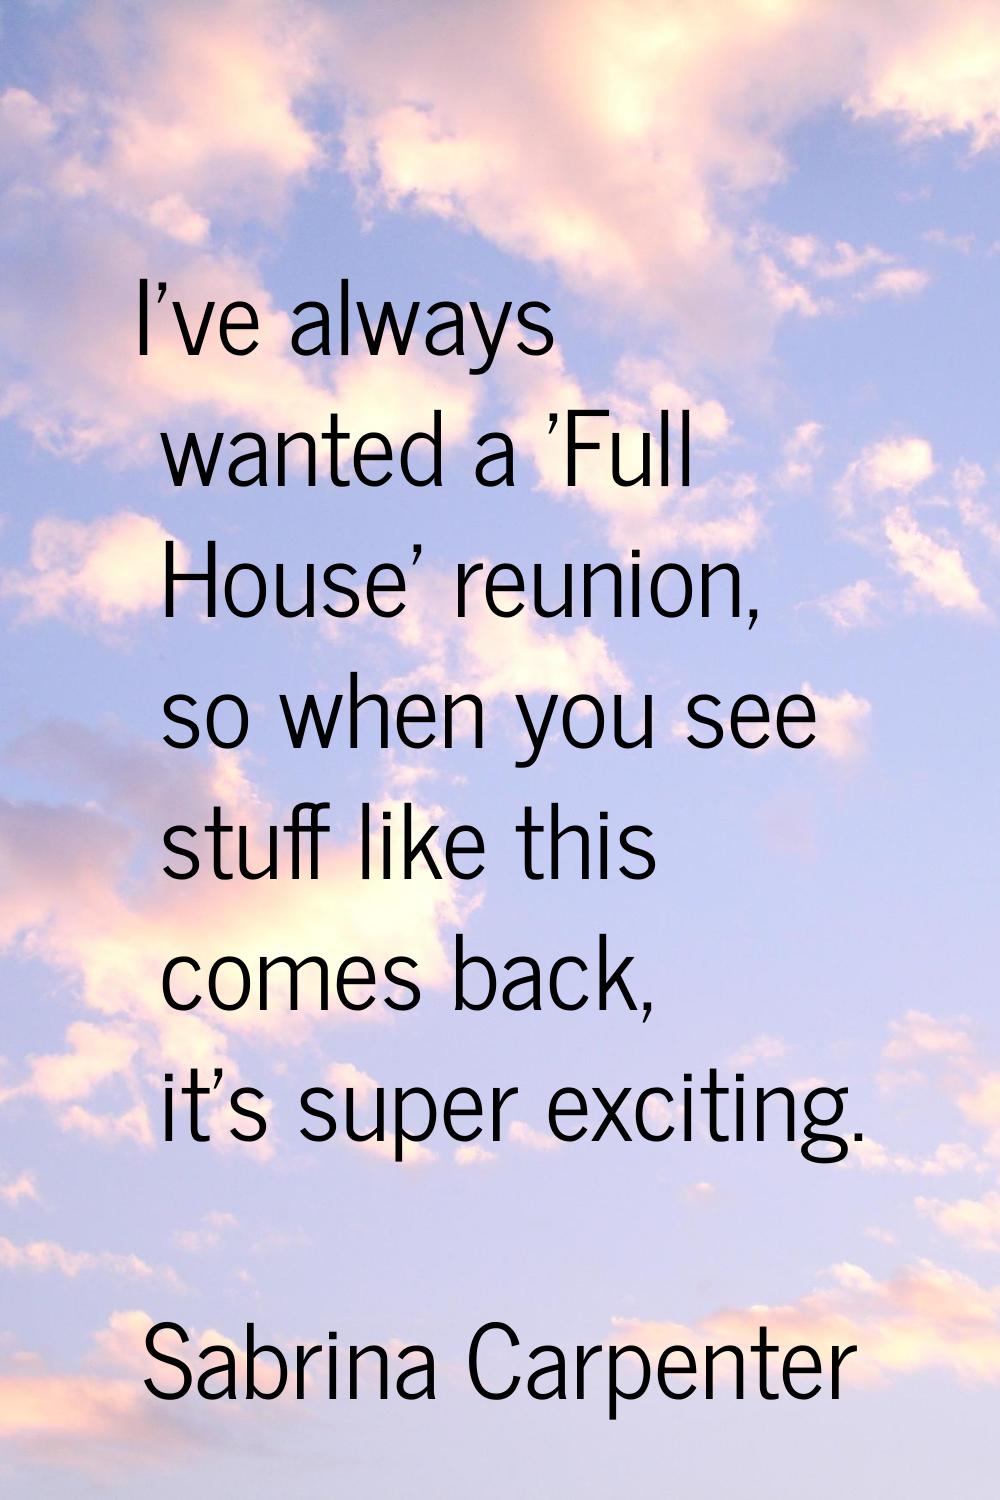 I've always wanted a 'Full House' reunion, so when you see stuff like this comes back, it's super e